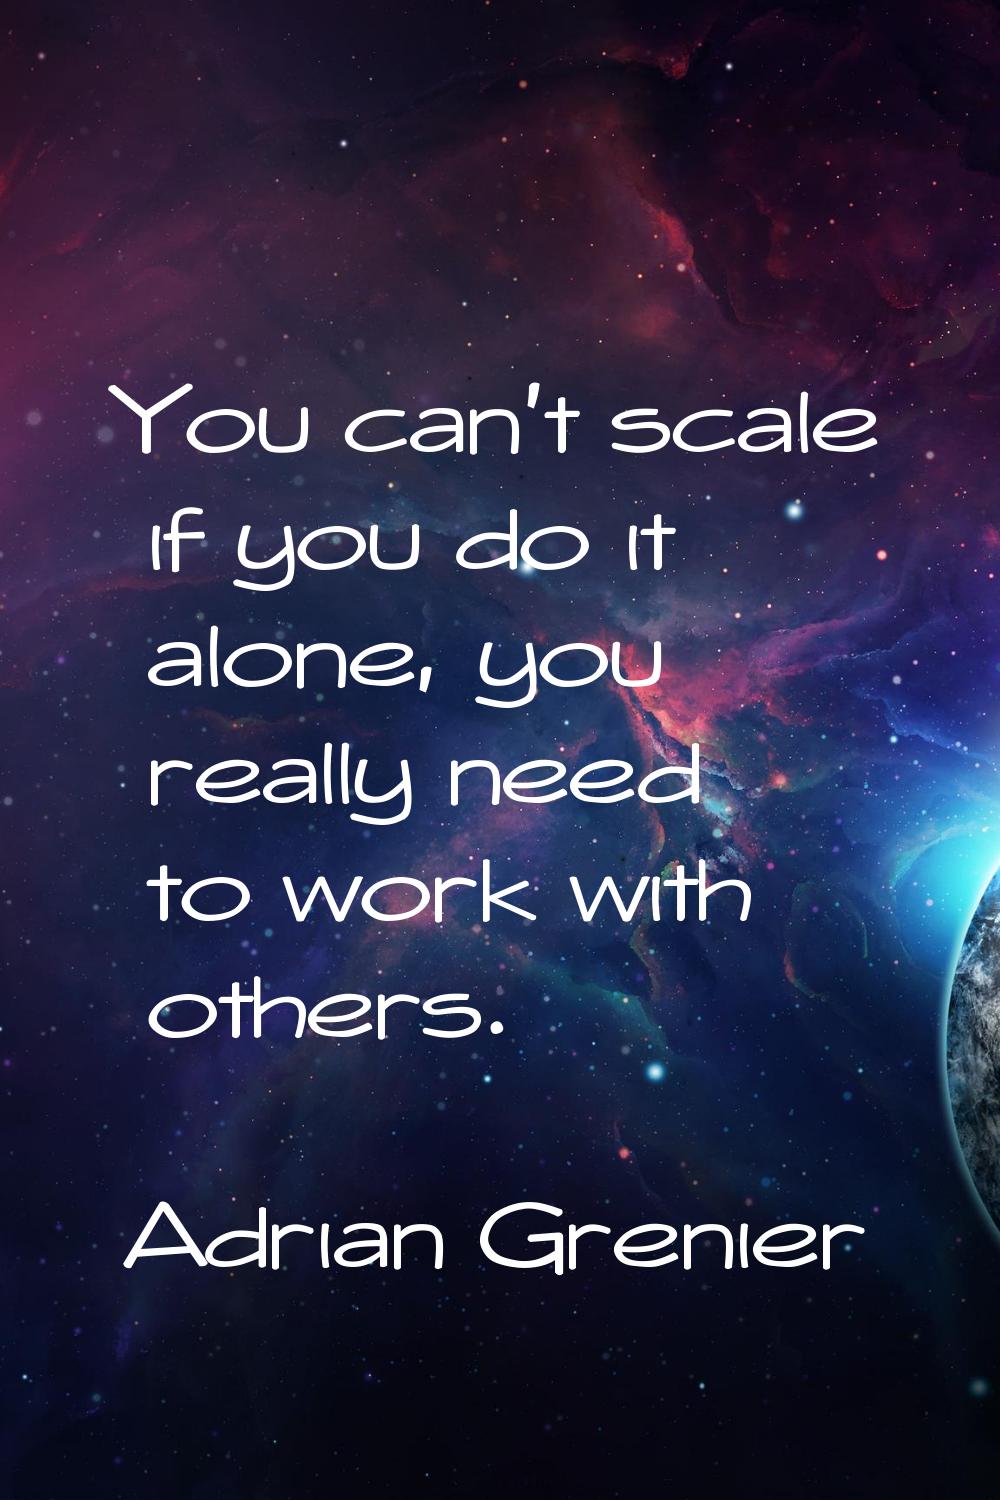 You can't scale if you do it alone, you really need to work with others.